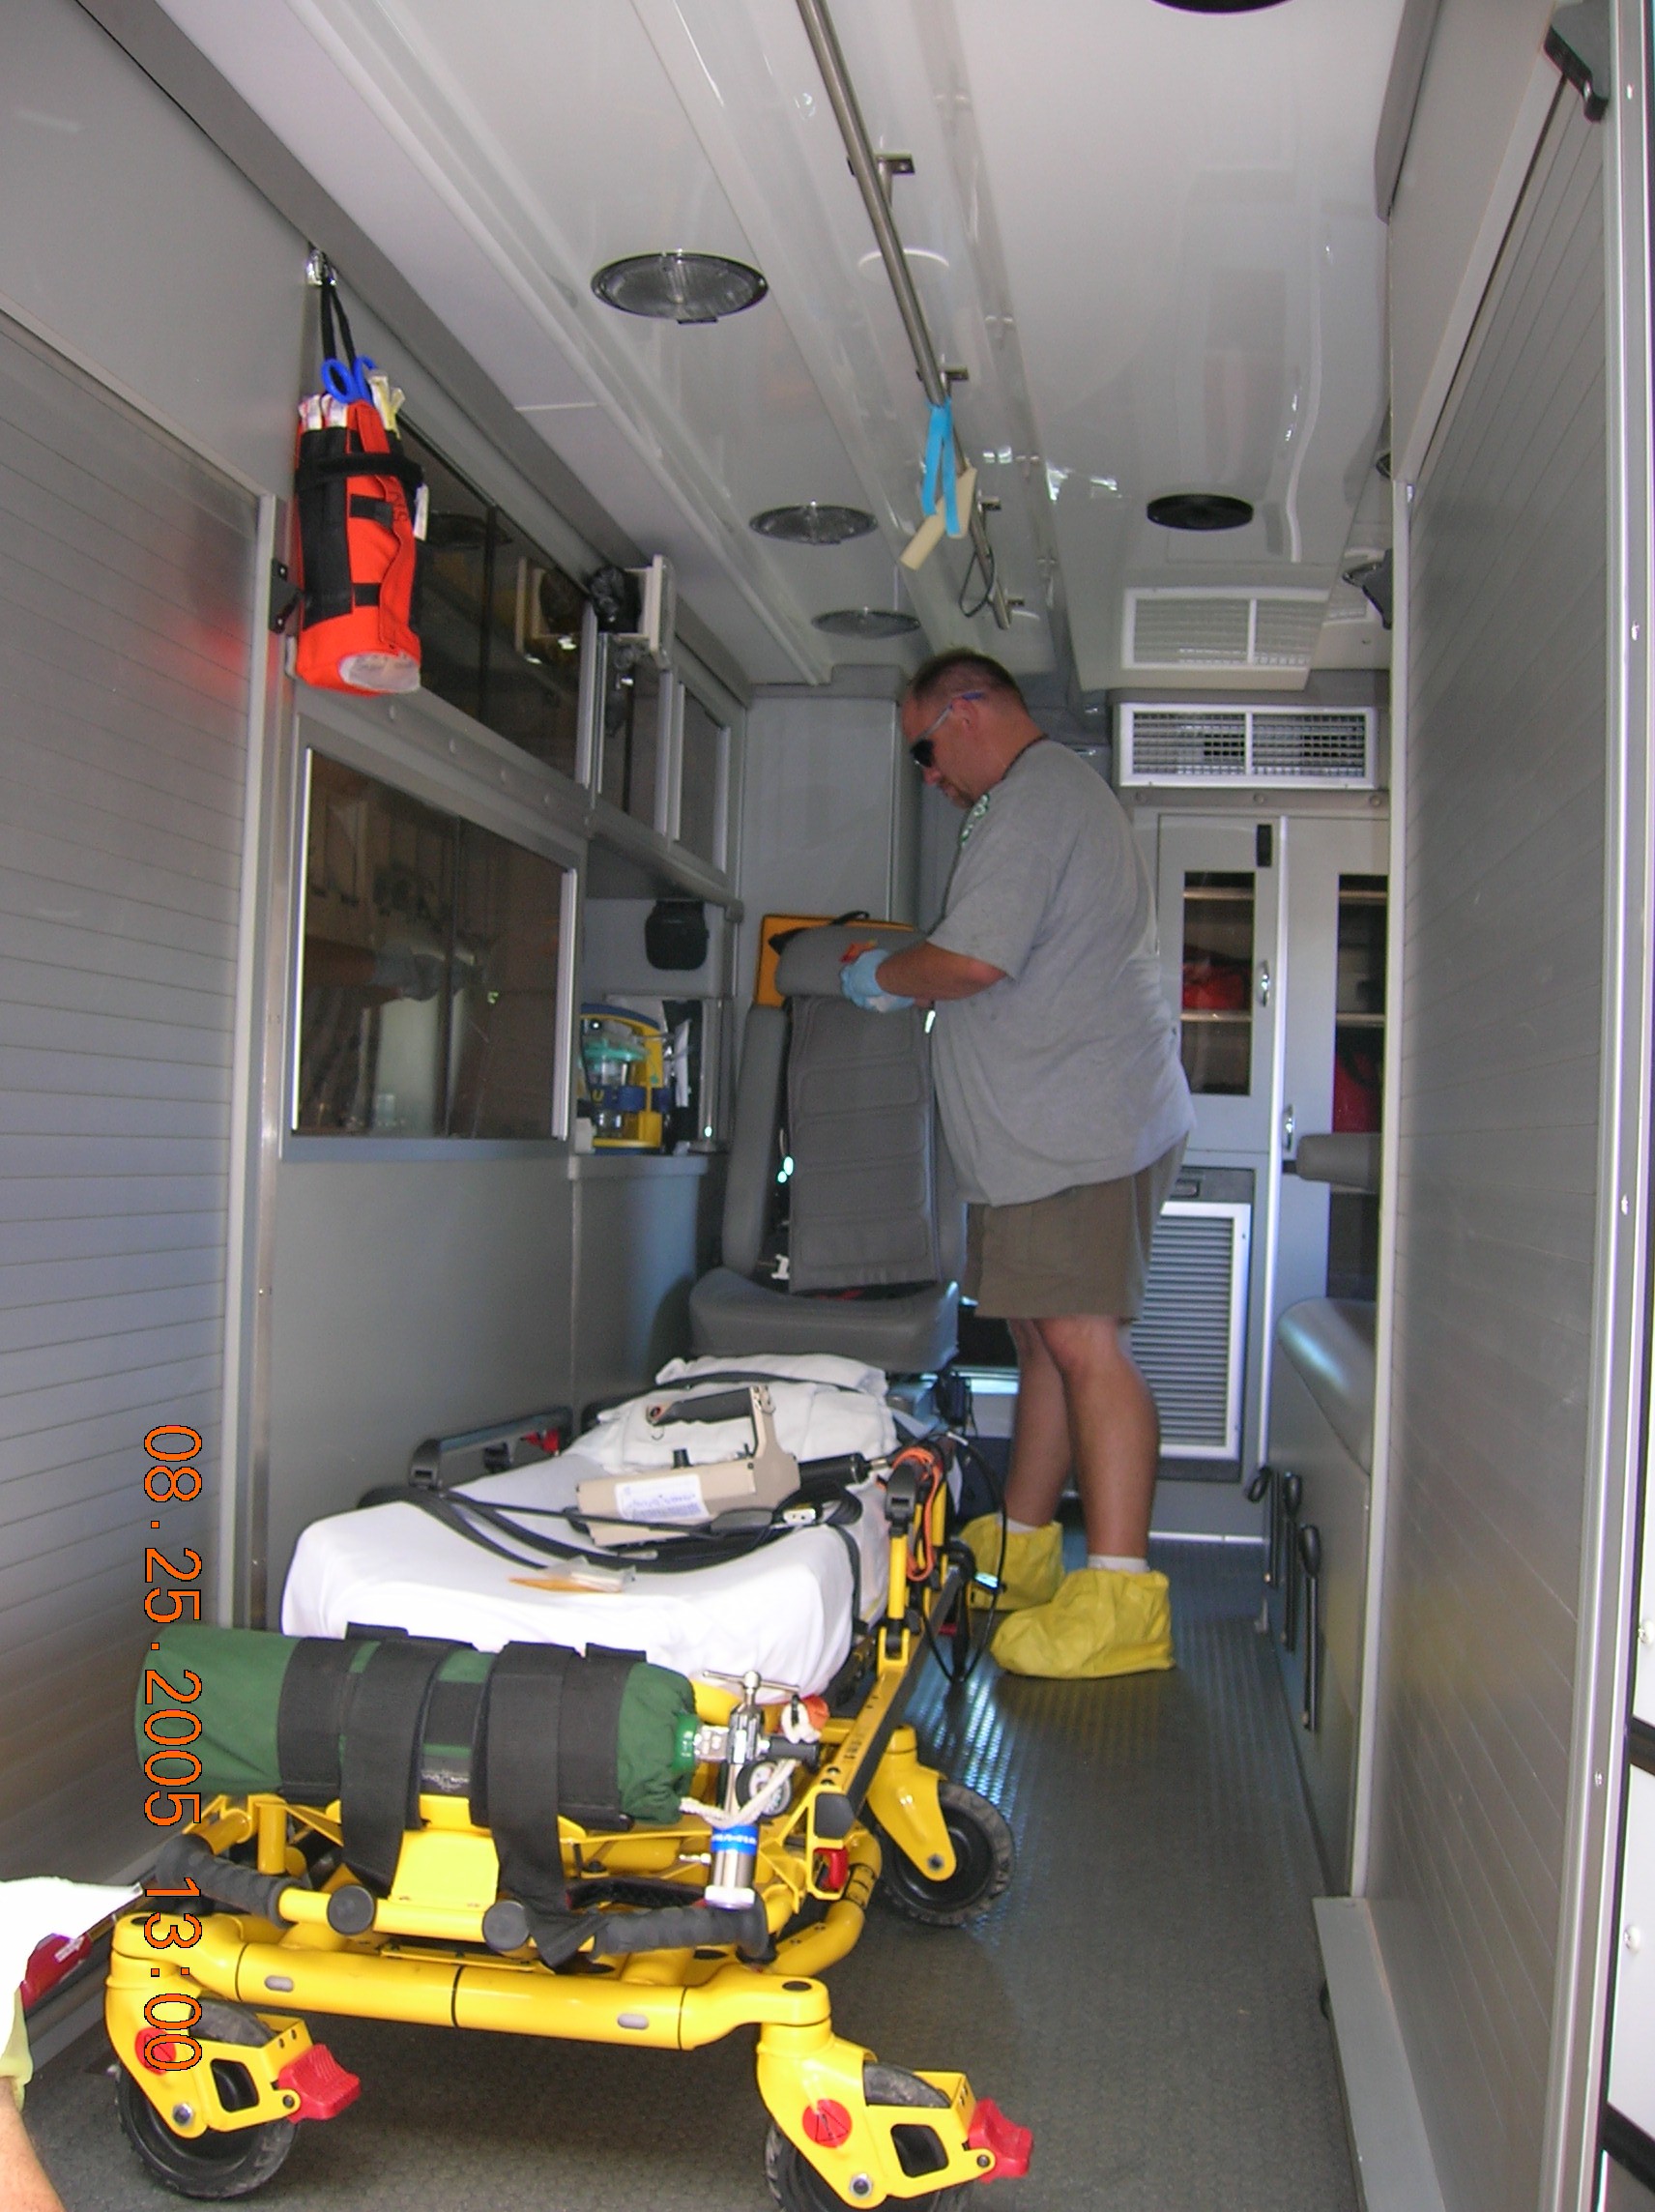 Dont Ask....
Finishing up the final release survey on an ambulance
Keywords: Sandia National Lab SNL